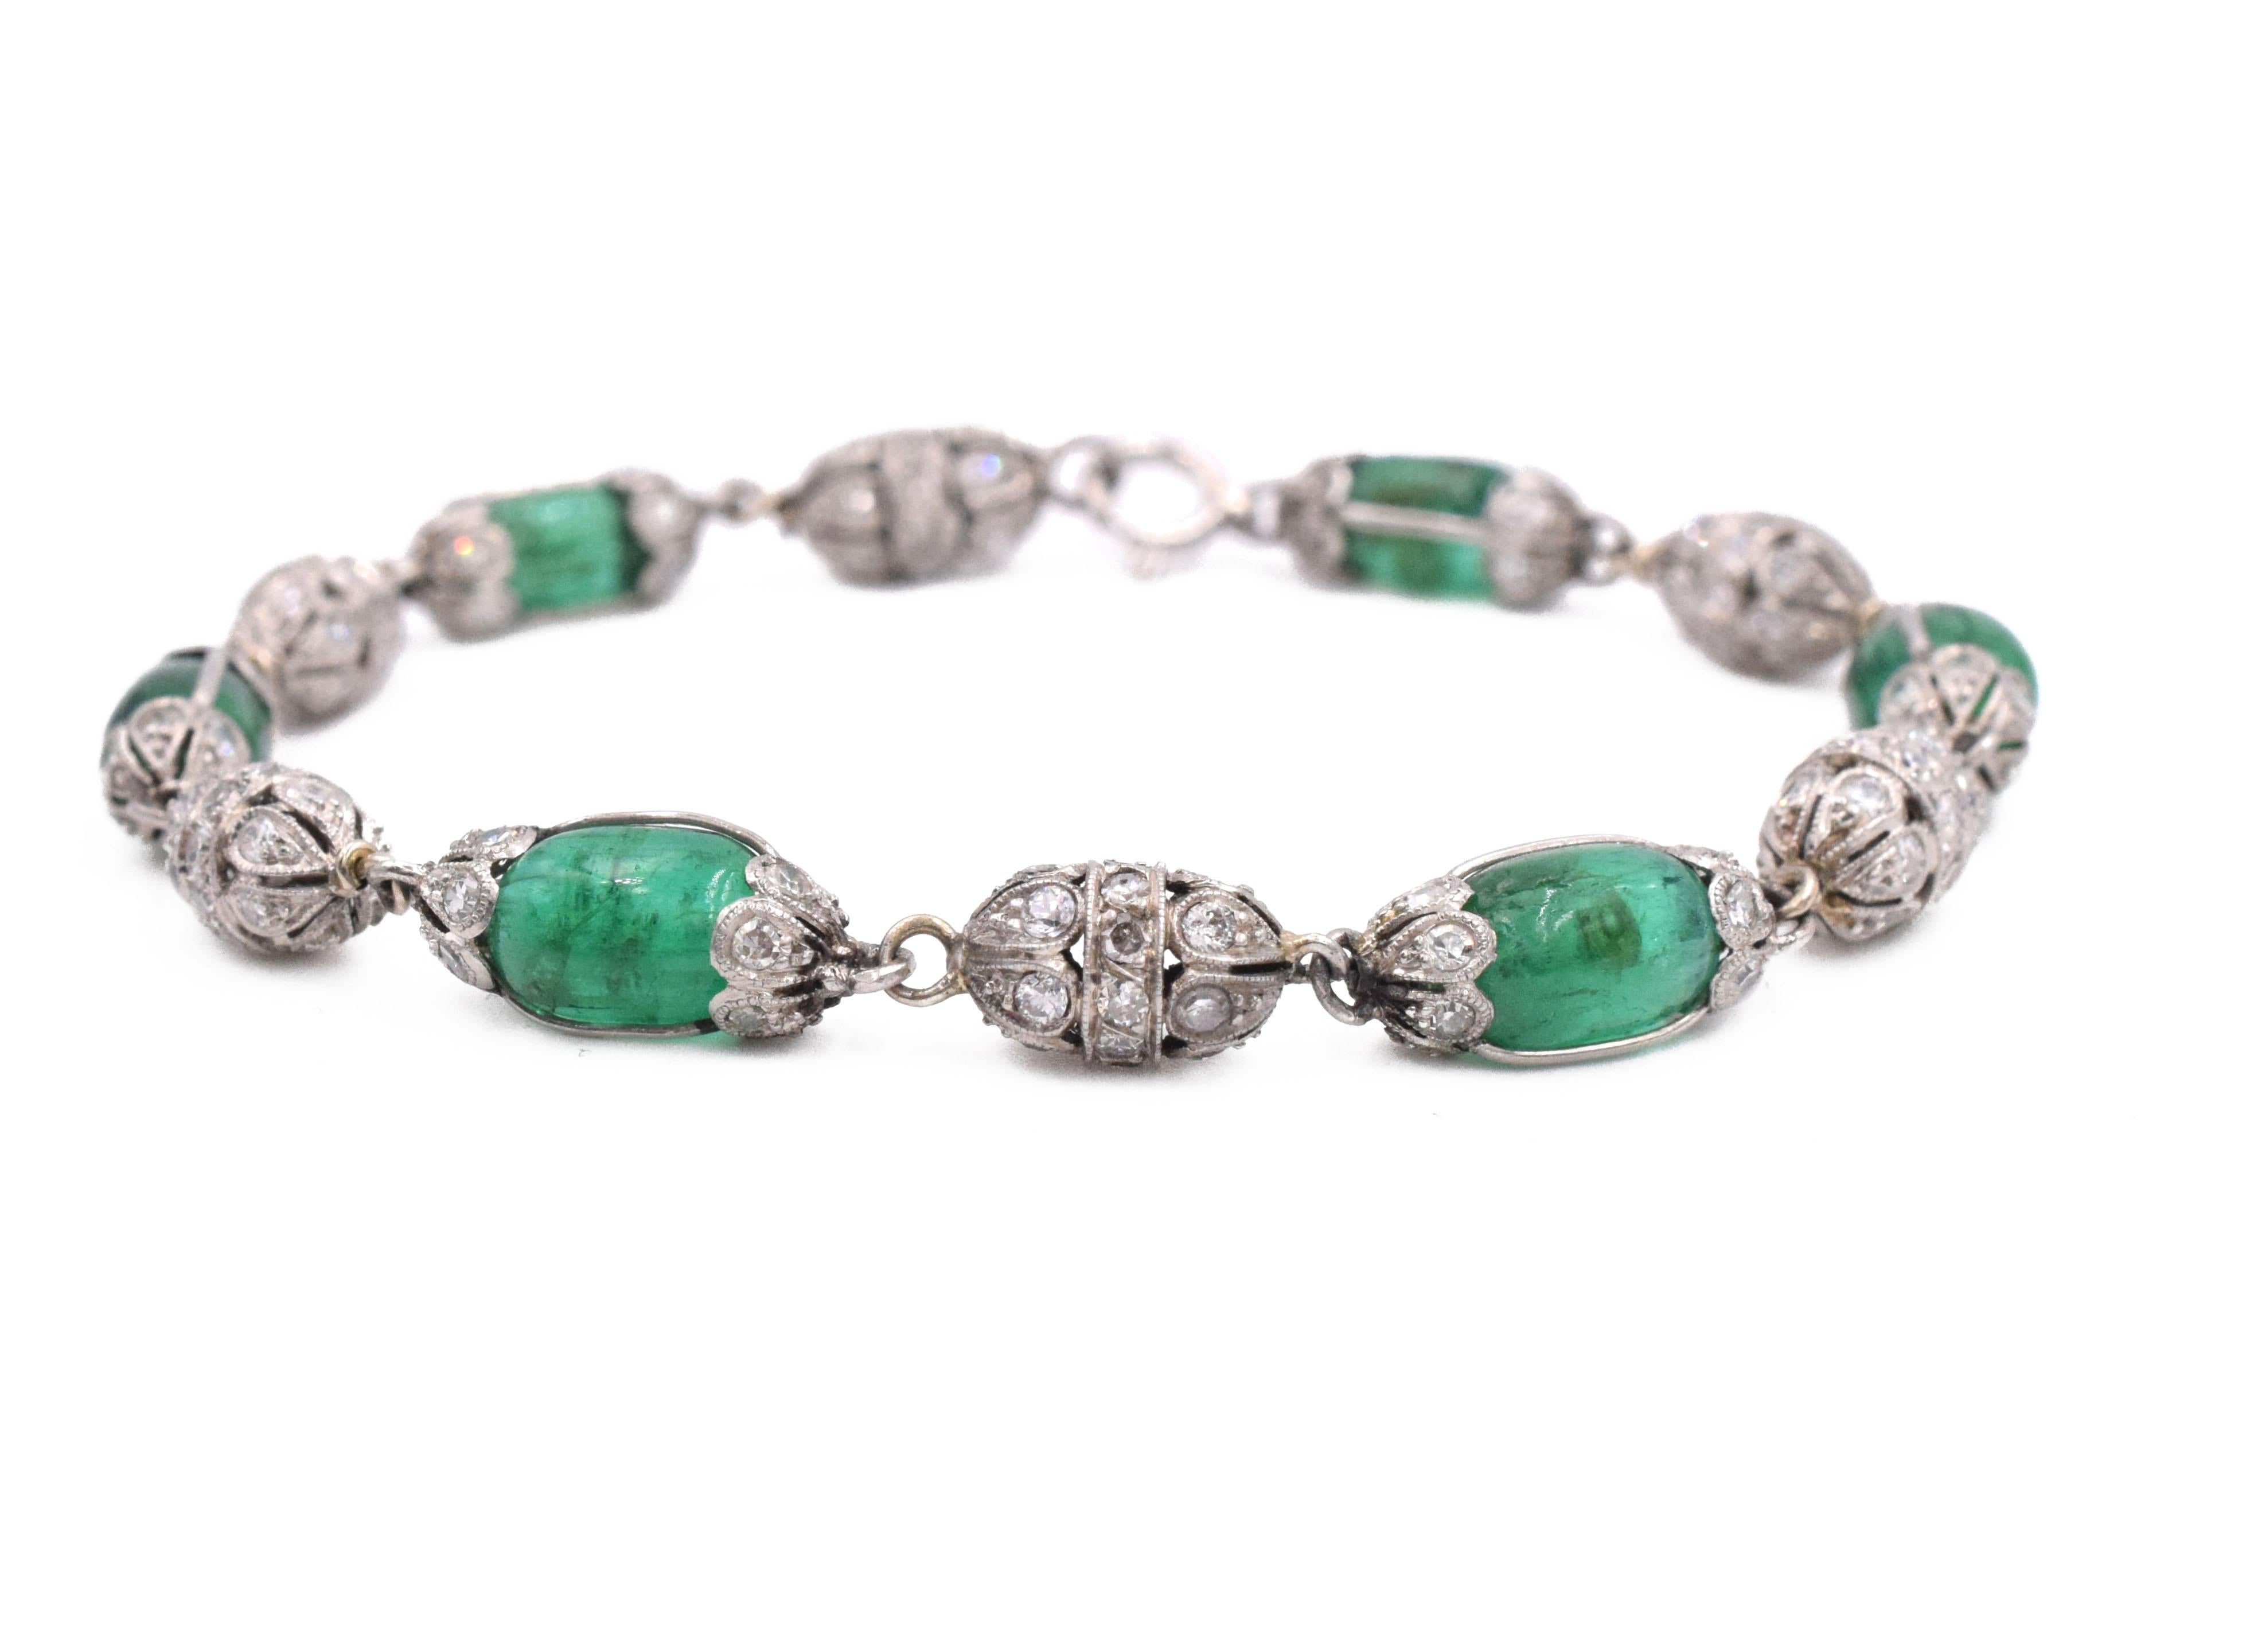 Antique Emerald Bead and Diamond Bracelet This bracelet has oval to cushion-shaped cabochon emerald beads and single-cut diamonds all set in platinum. Length: 7.25 inches. circa 1915. Certified by AGL, 2019, report no. XXXXXXXX
Colombia, minor